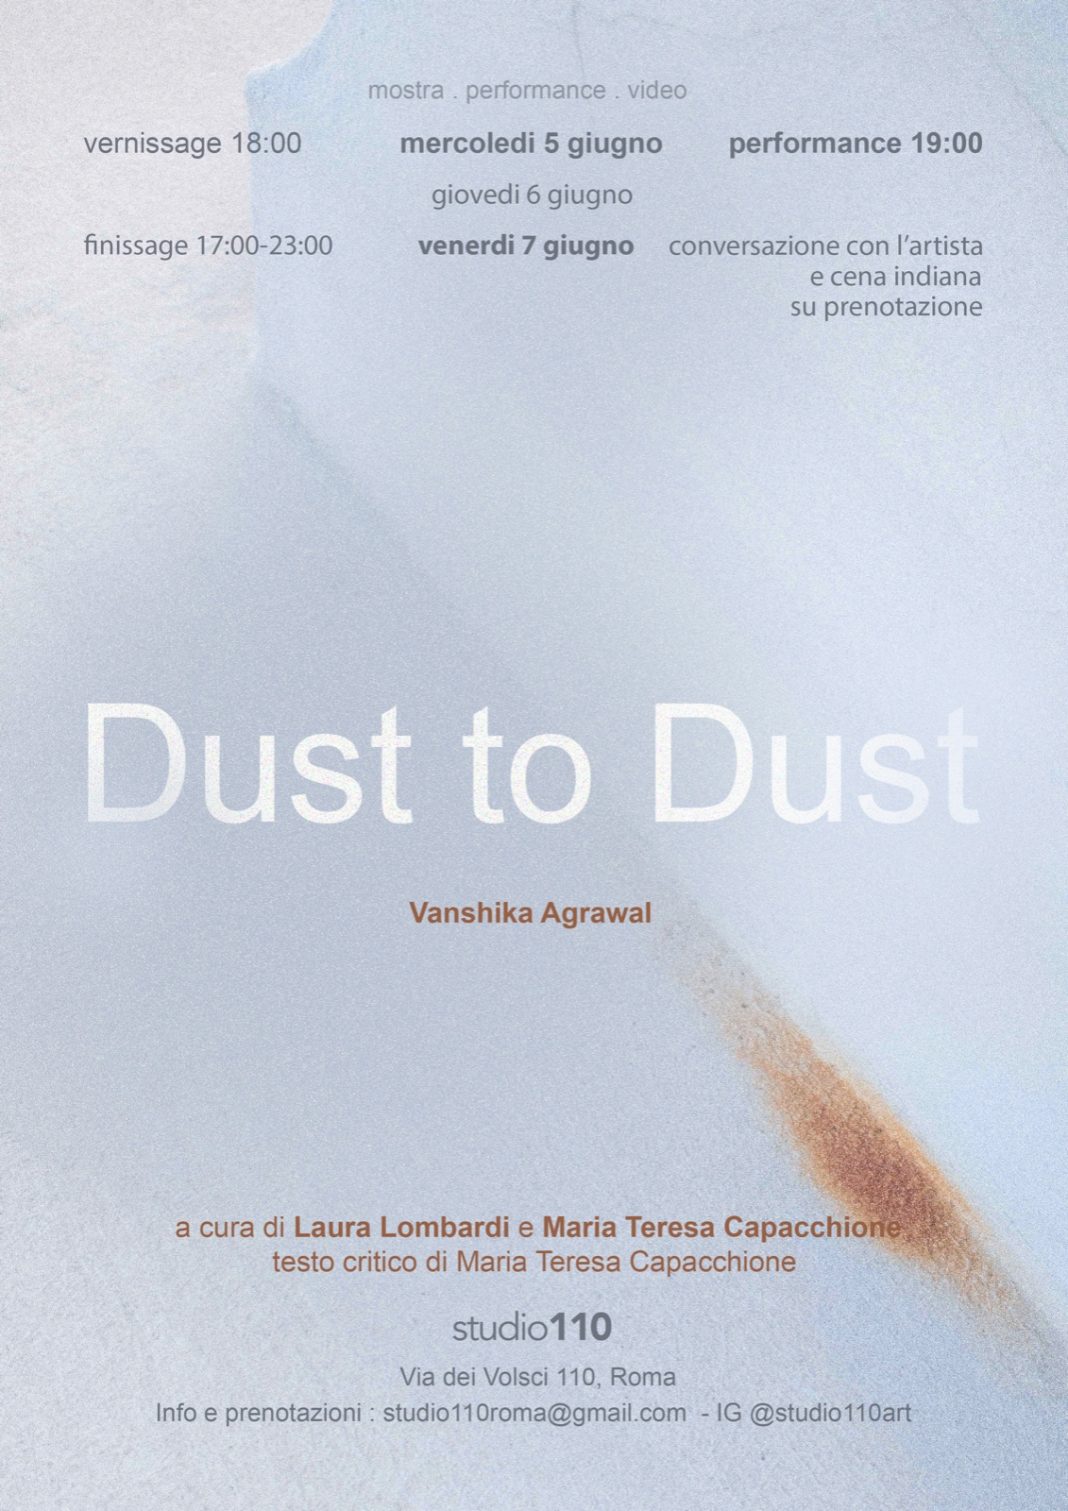 Dust to Dusthttps://www.exibart.com/repository/media/formidable/11/img/f32/invito-low-Dust-to-Dust-1068x1511.jpeg